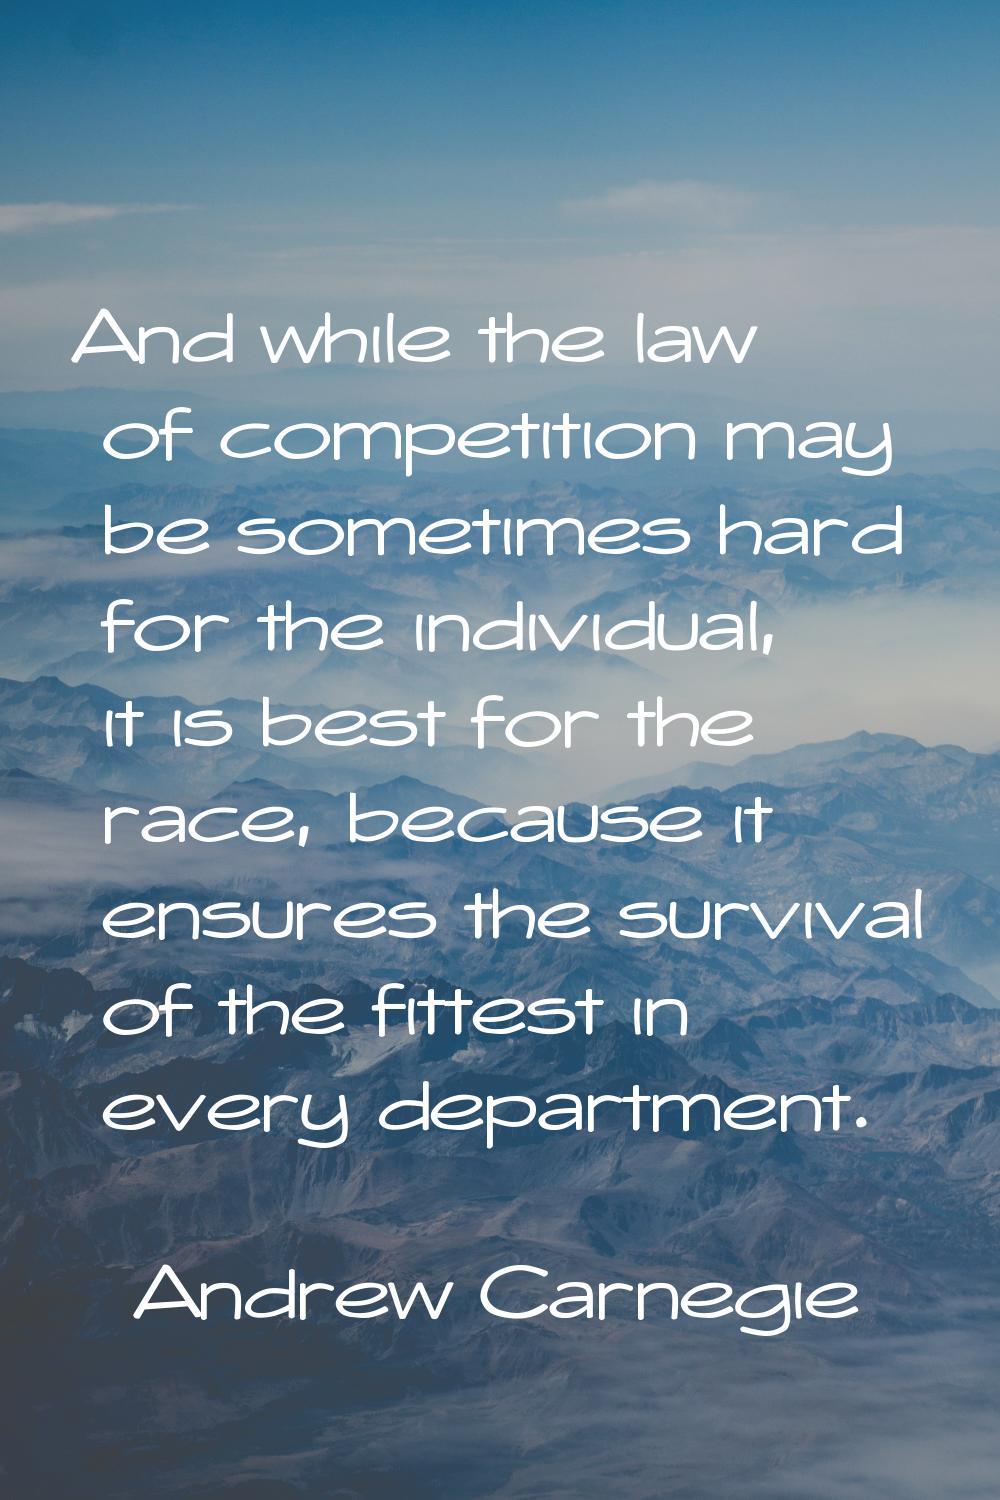 And while the law of competition may be sometimes hard for the individual, it is best for the race,